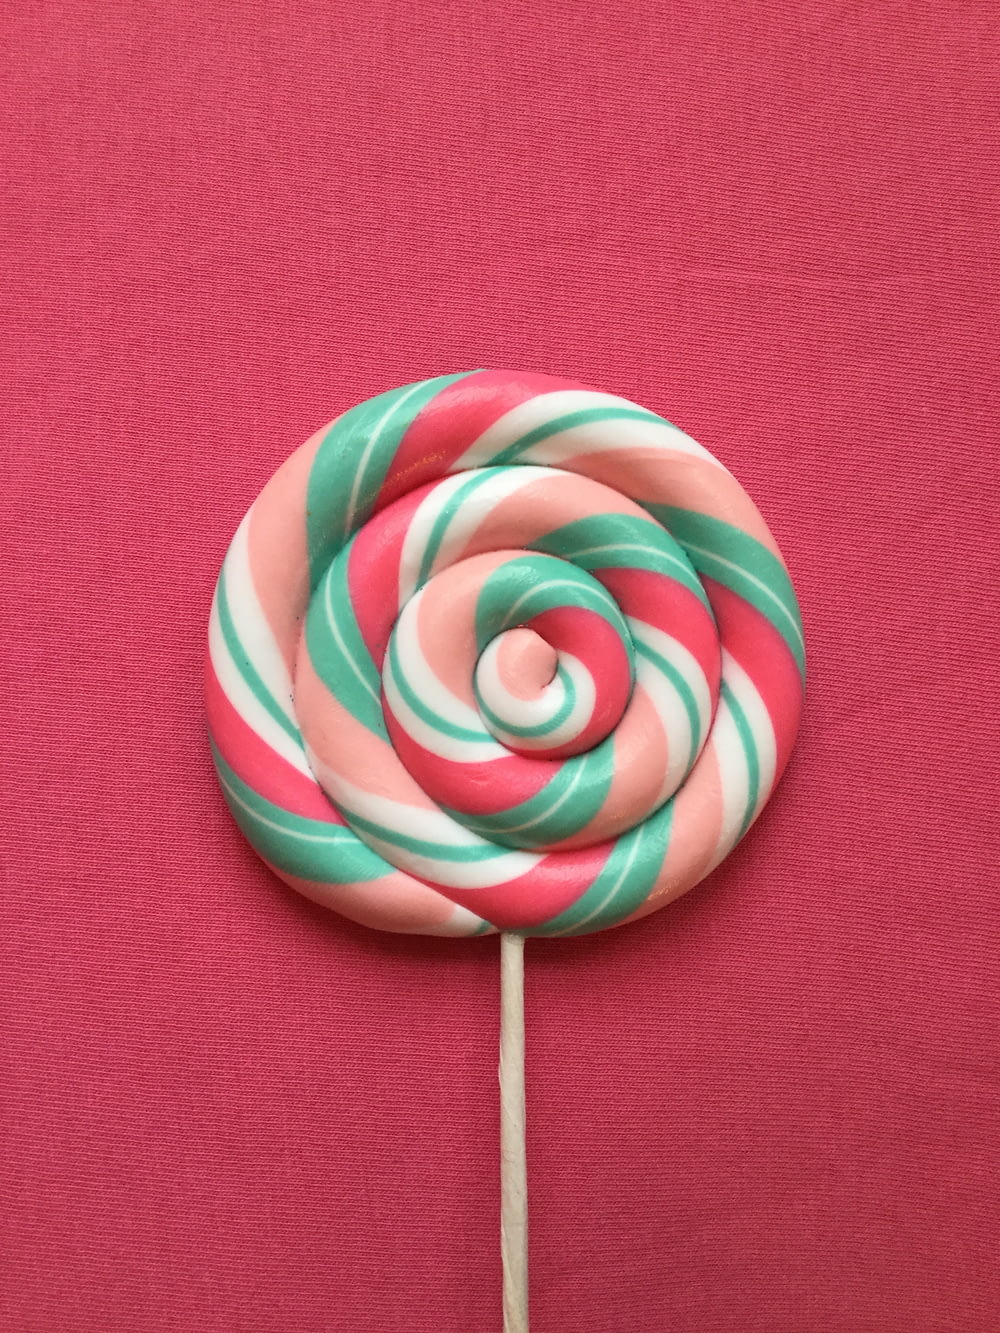 green-red-beige-and-white lollipop